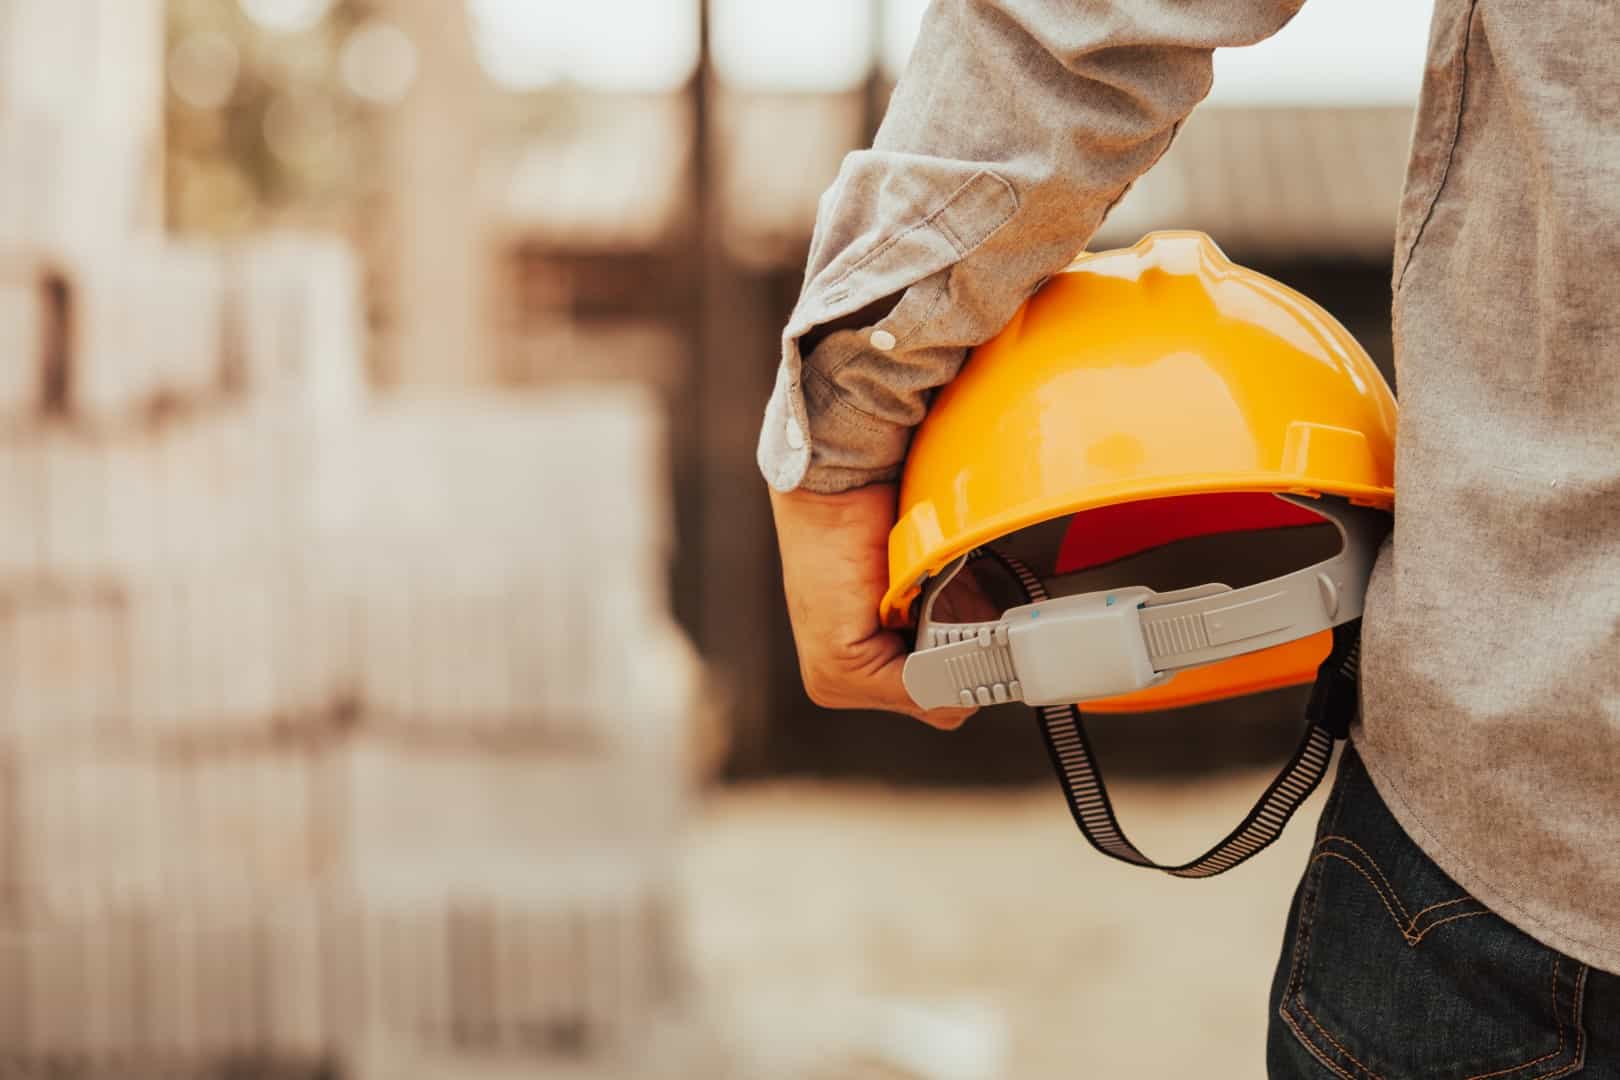 Worker carrying a hardhat to demonstrate workplace health and safety